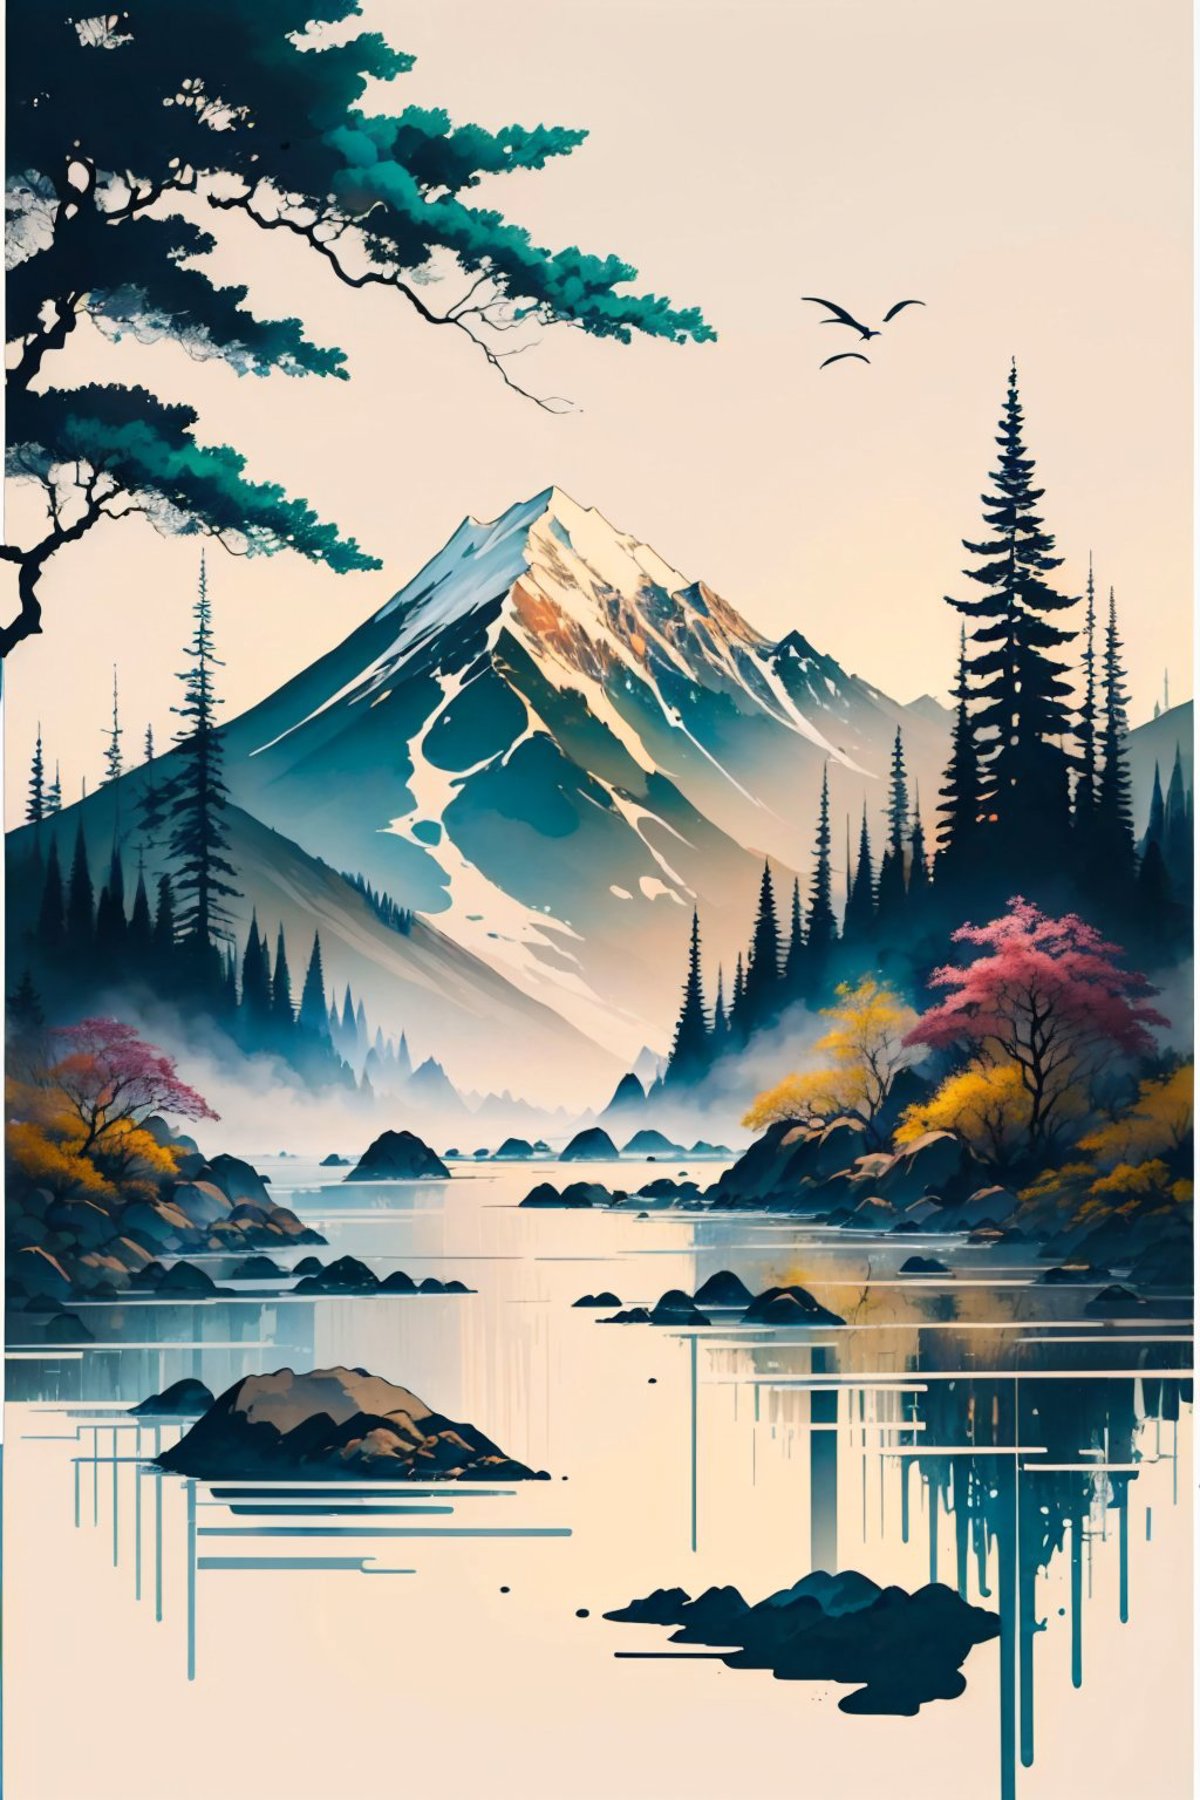 Ink scenery | 水墨山水 image by justTNP